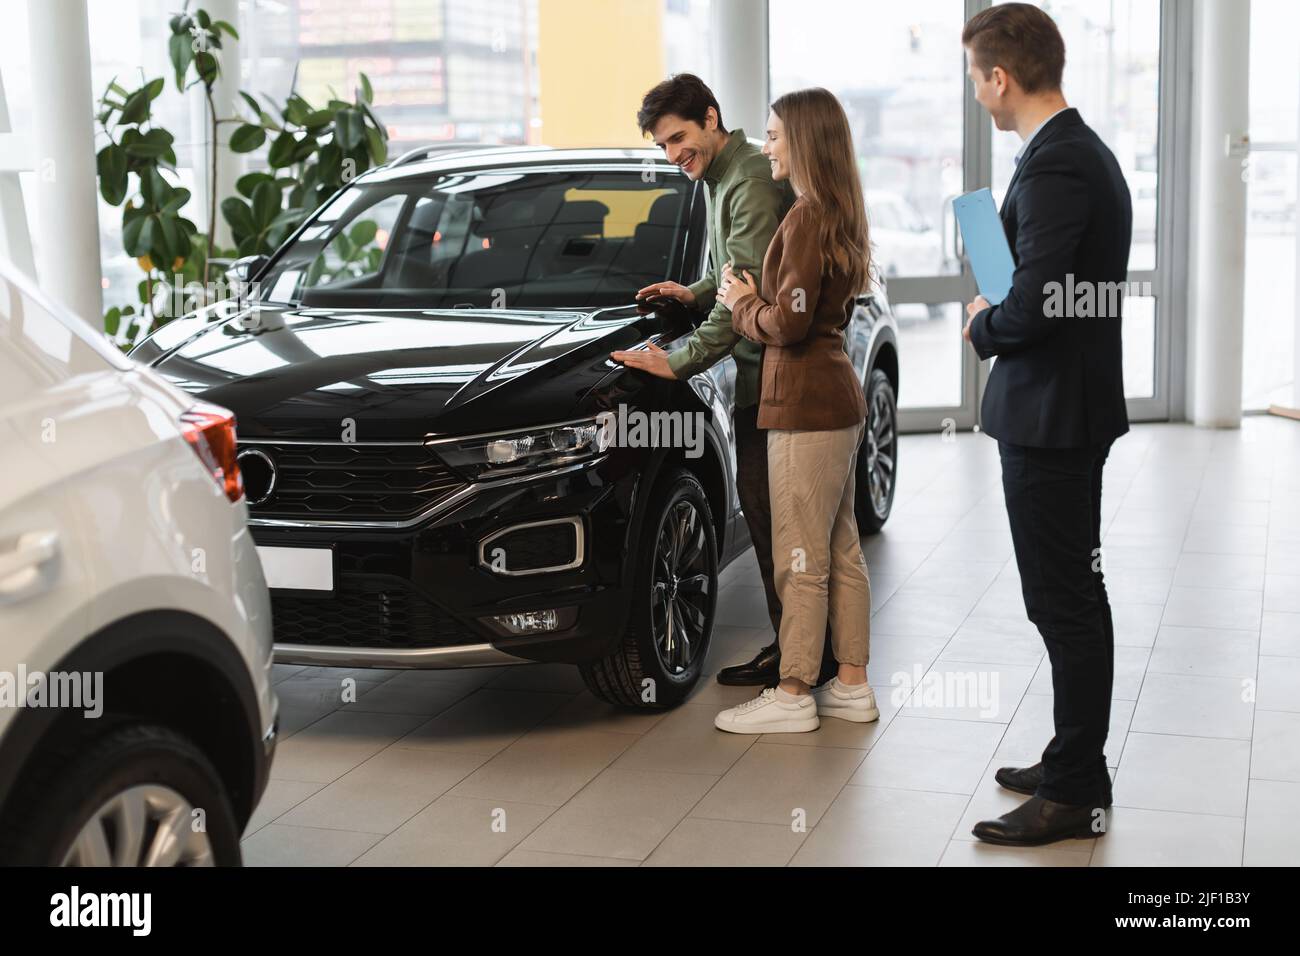 Cheery millennial couple speaking to car salesman about buying or renting new vehicle at dealership, copy space Stock Photo